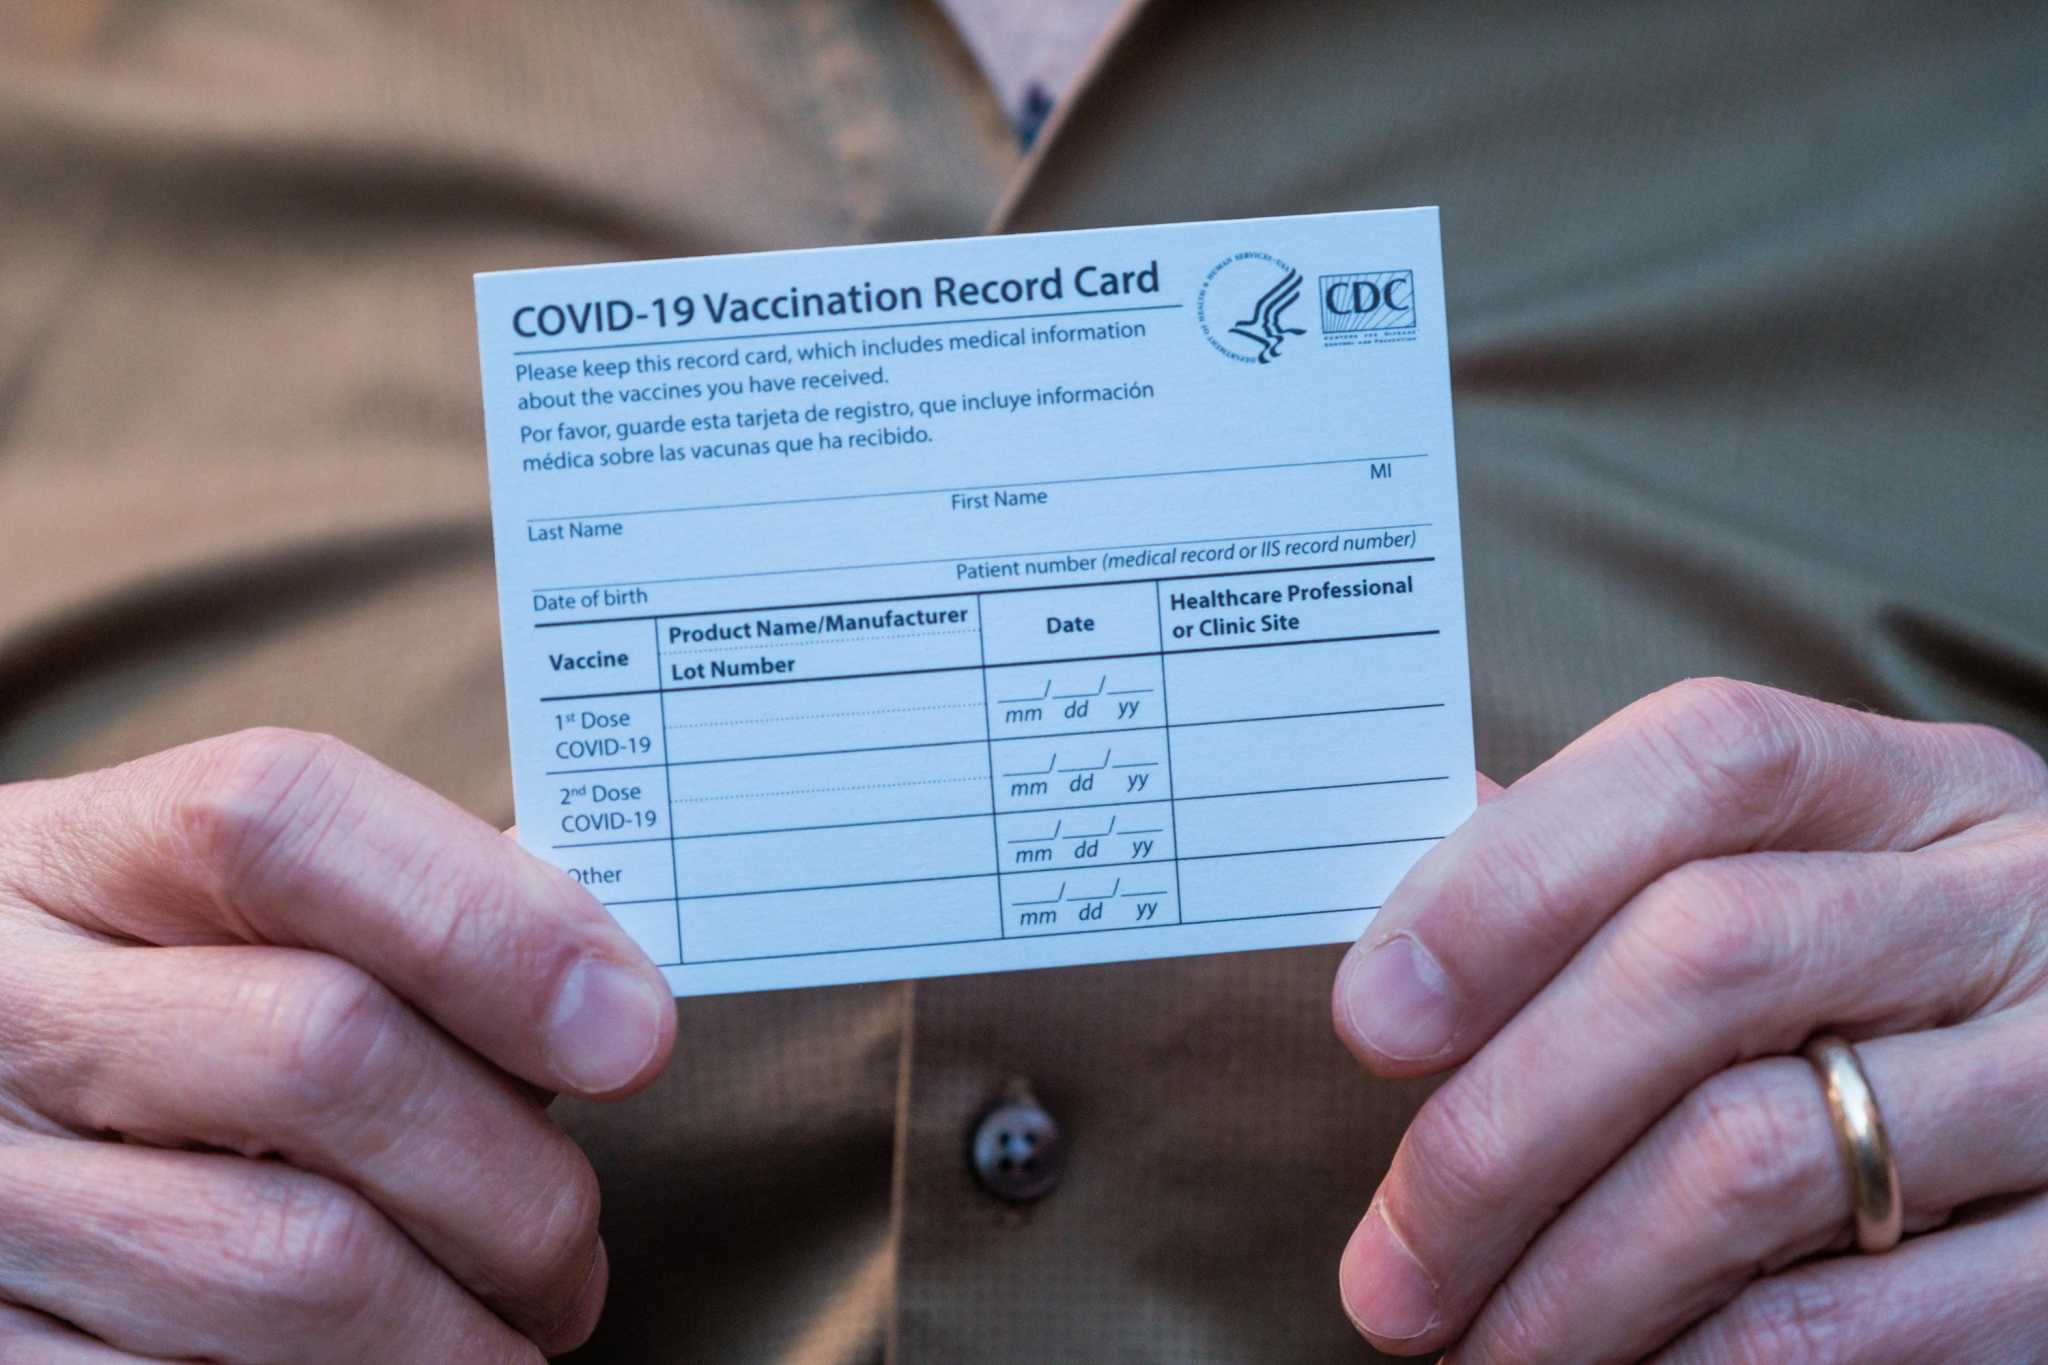 online-scammers-traffic-in-fake-covid-vaccination-cards-authorities-warn